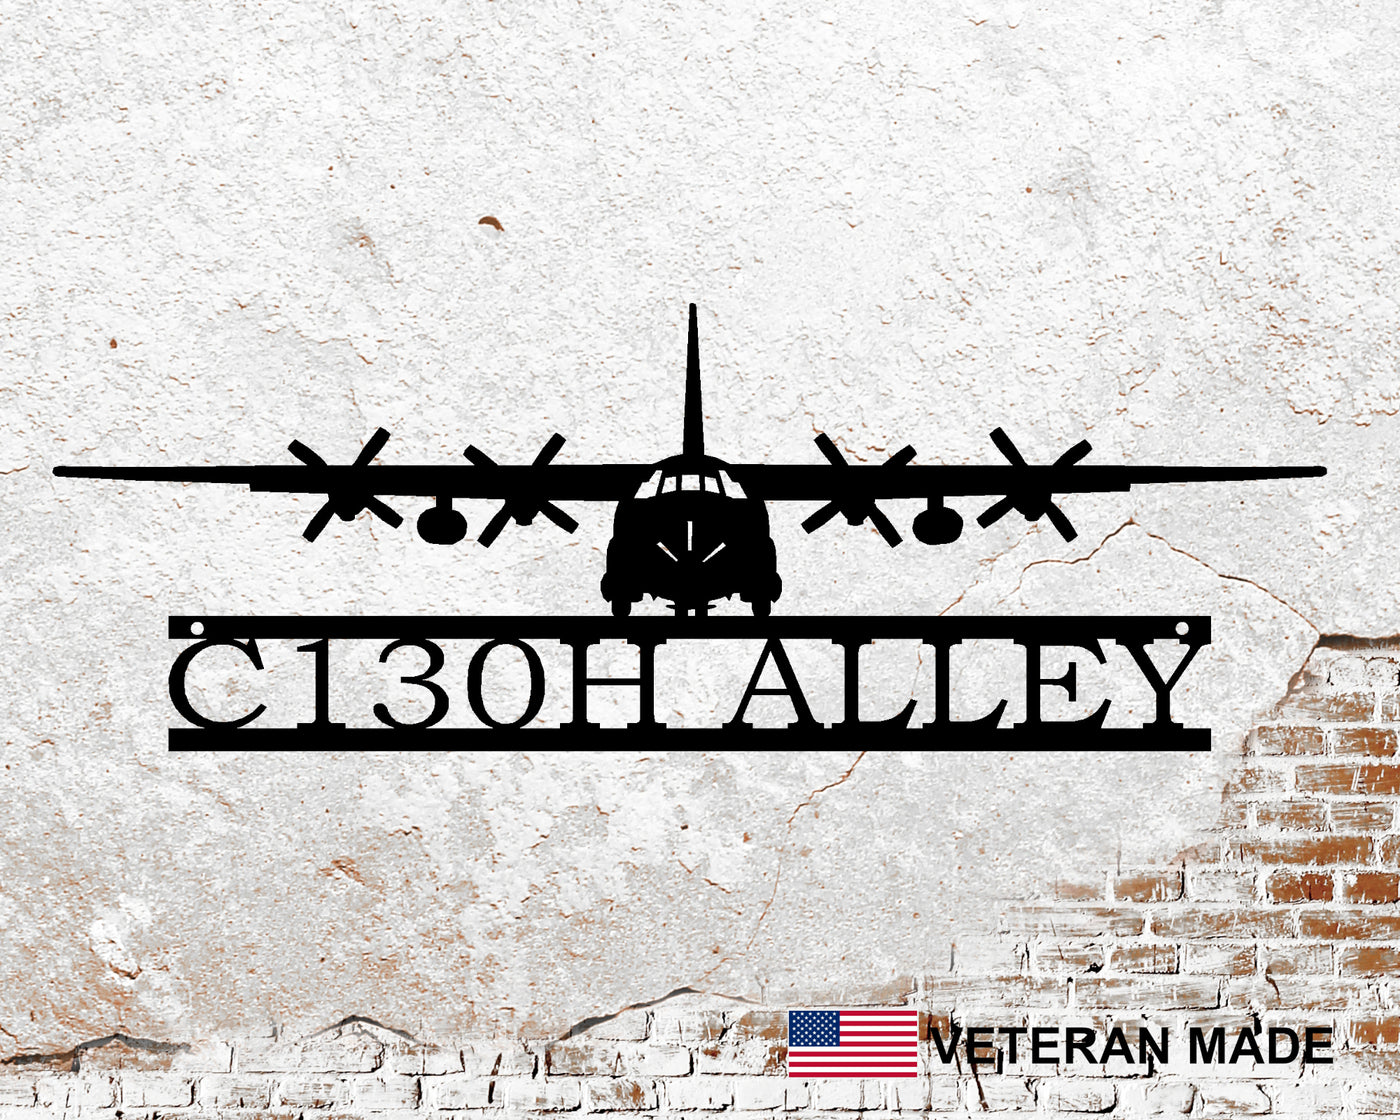 Personalized C-130 Hercules Aircraft Metal Sign - Madison Iron and Wood - Personalized sign - metal outdoor decor - Steel deocrations - american made products - veteran owned business products - fencing decorations - fencing supplies - custom wall decorations - personalized wall signs - steel - decorative post caps - steel post caps - metal post caps - brackets - structural brackets - home improvement - easter - easter decorations - easter gift - easter yard decor